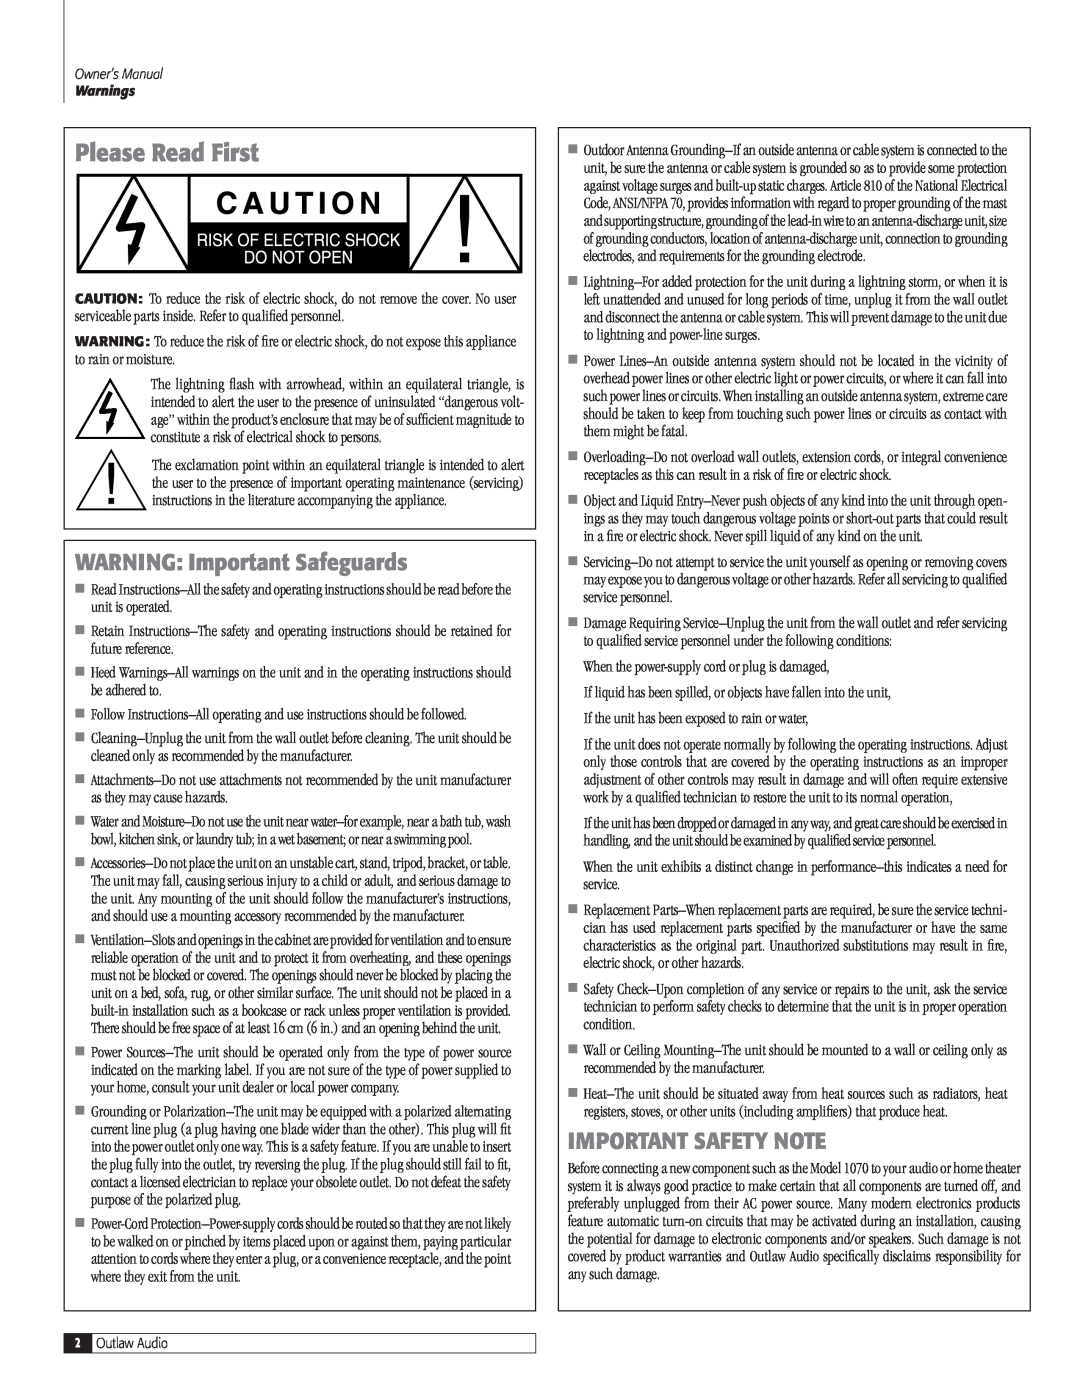 Outlaw Audio 1070 owner manual Please Read First, WARNING Important Safeguards, Important Safety Note 